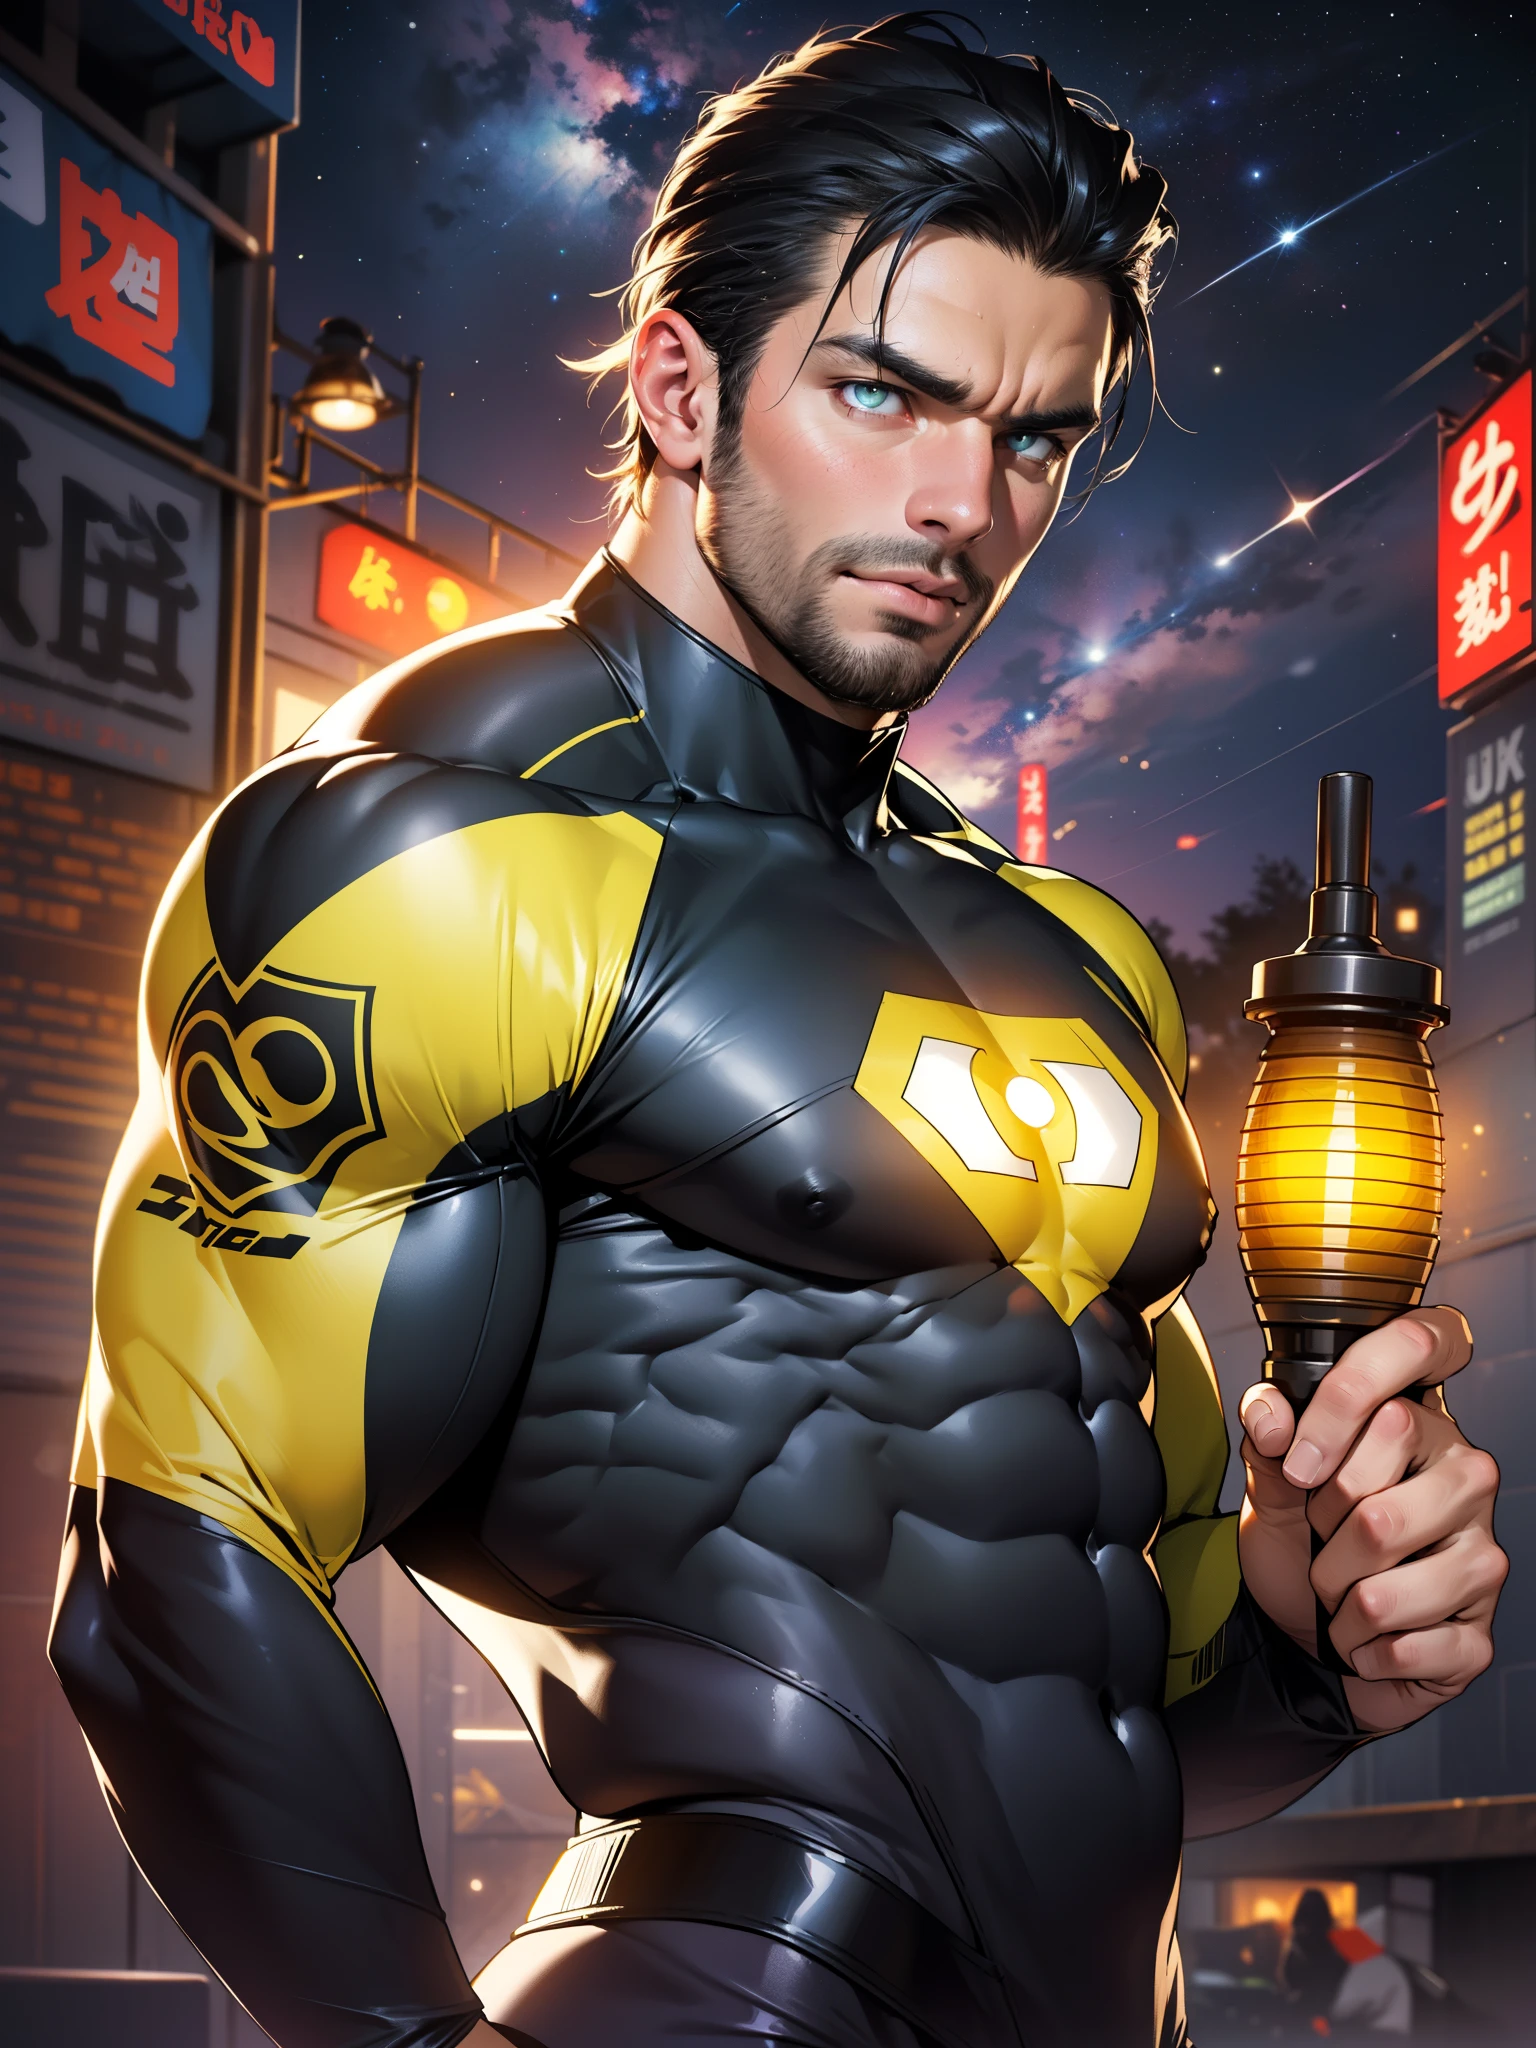 An award-winning original photo，A wild muscular man, (30 years old man:1.3), 1boy, Solo, (wearing a (yellow lantern) metal suit), (yellow ring on a finger), spikes, neon stripes, black hair, (big shoulder), muscular, hunk,  stubbles, Short beard, (Detailed face:1.3), (beautiful eyes:1.2), really angry, Dynamic Angle, volumetric lighting, (Best quality, A high resolution, Photorealistic), Cinematic lighting, Masterpiece, RAW photo, Intricate details, hdr, depth of field, upper body shot, in space background